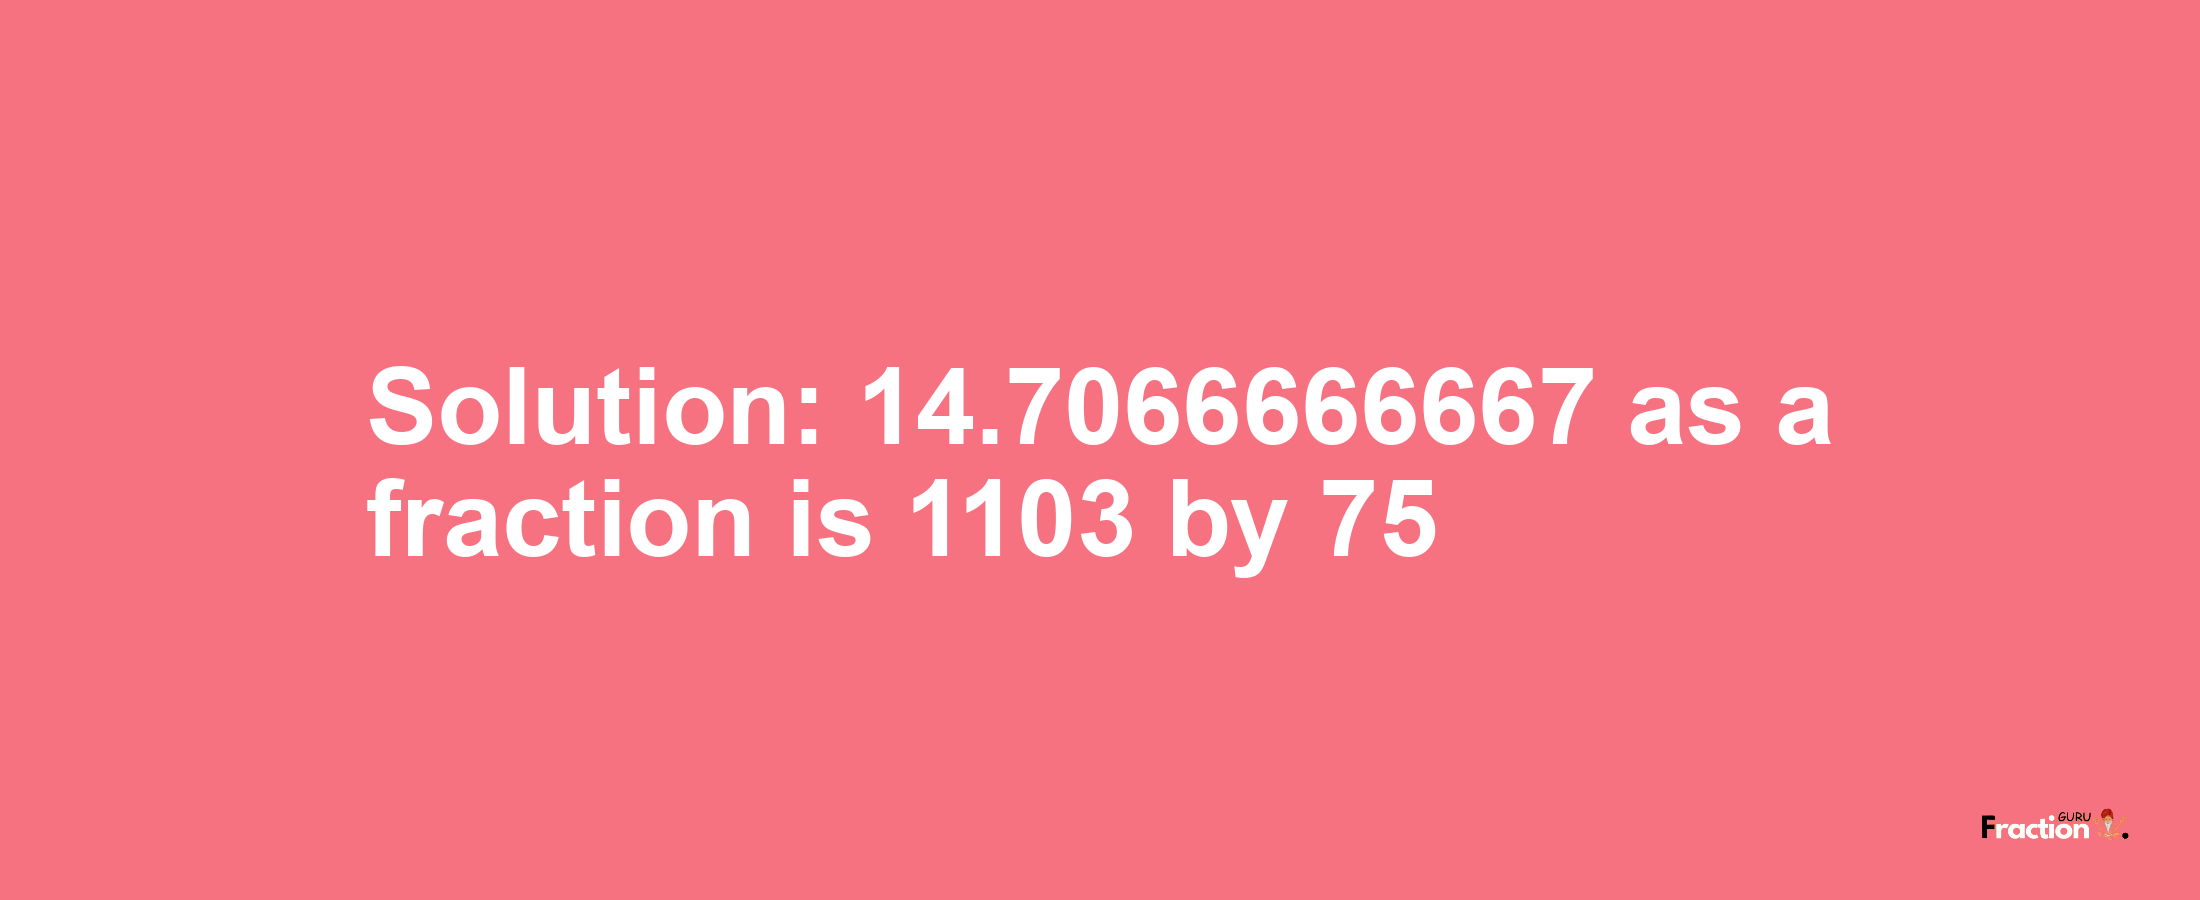 Solution:14.7066666667 as a fraction is 1103/75